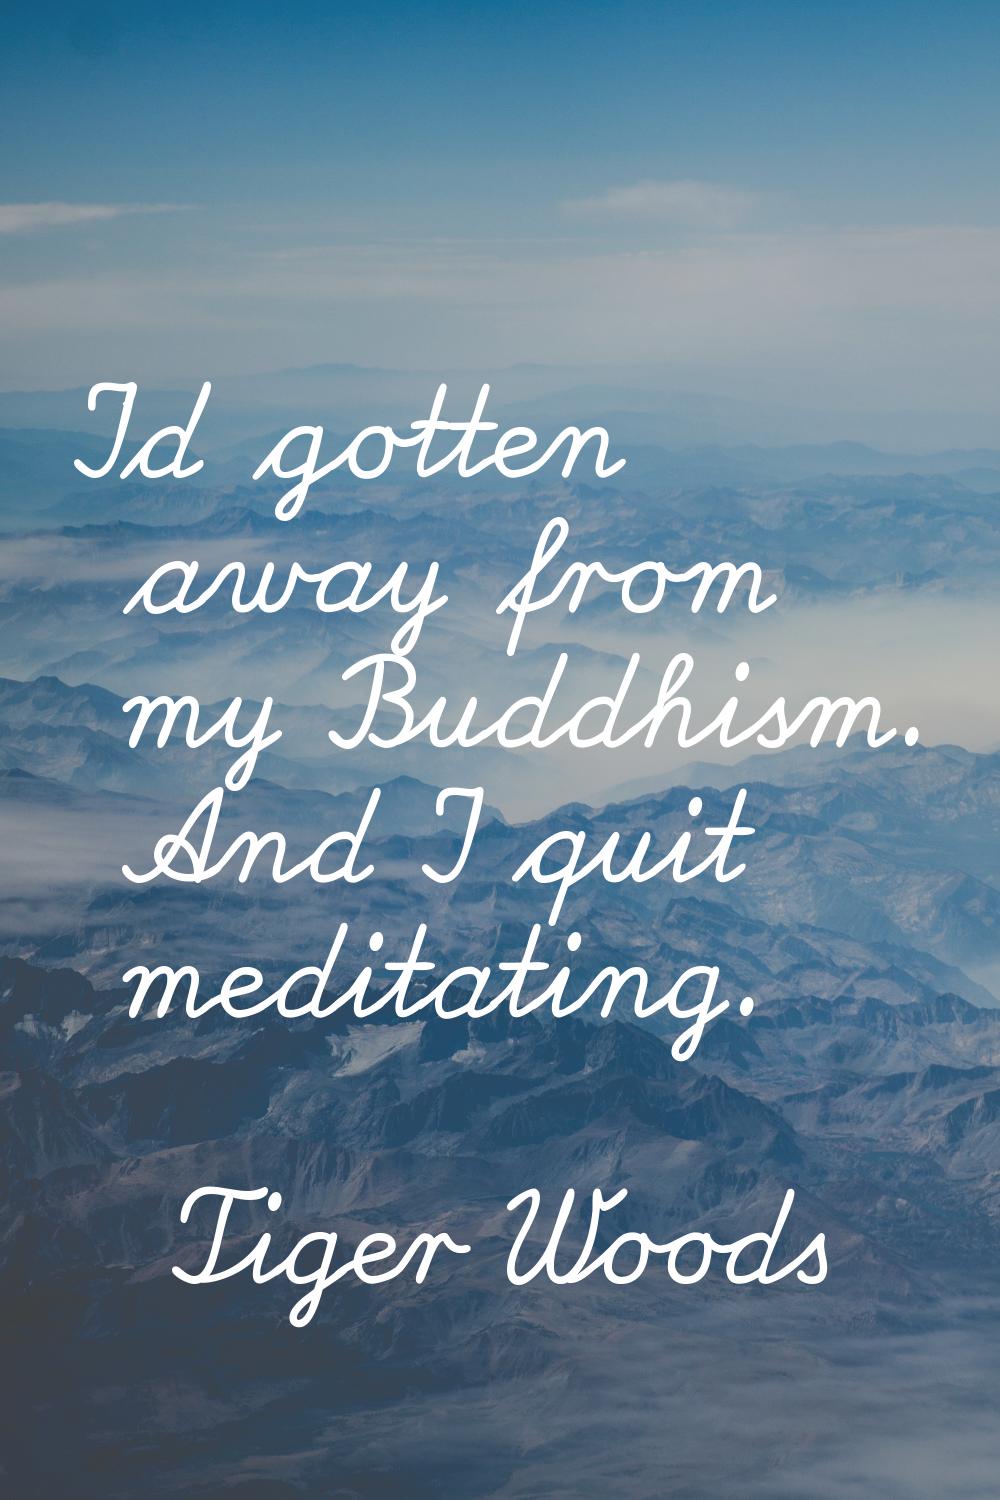 I'd gotten away from my Buddhism. And I quit meditating.